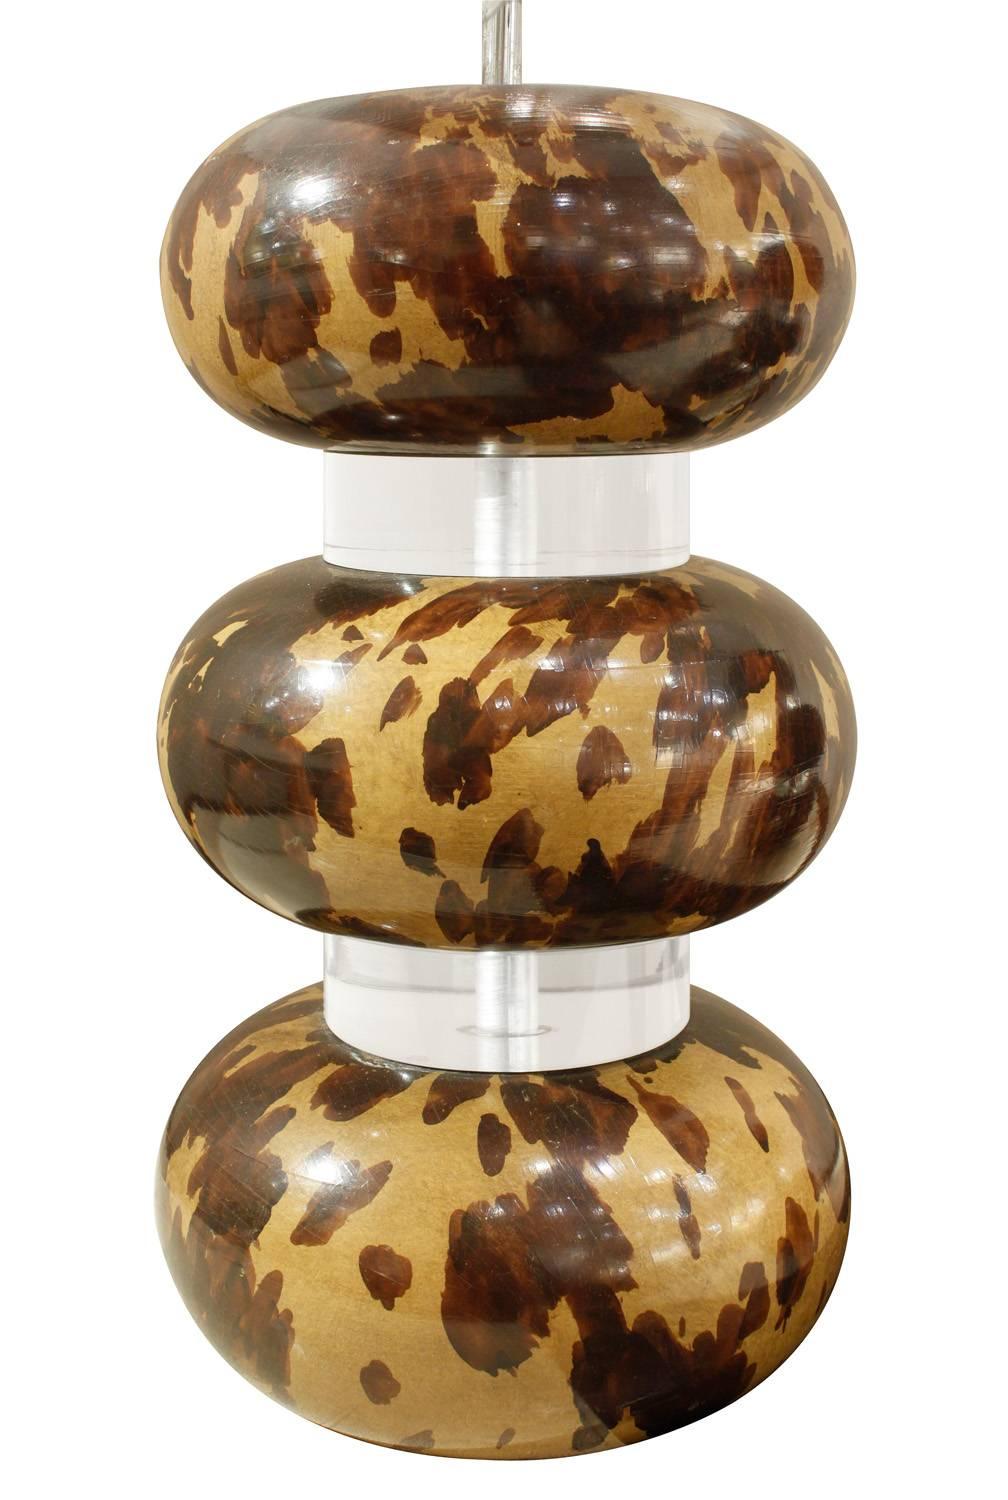 Pair of exceptional table lamps with tortoise shell lacquered sections separated by thick Lucite discs by Karl Springer, American, 1970s. Each lamp has two bulbs.